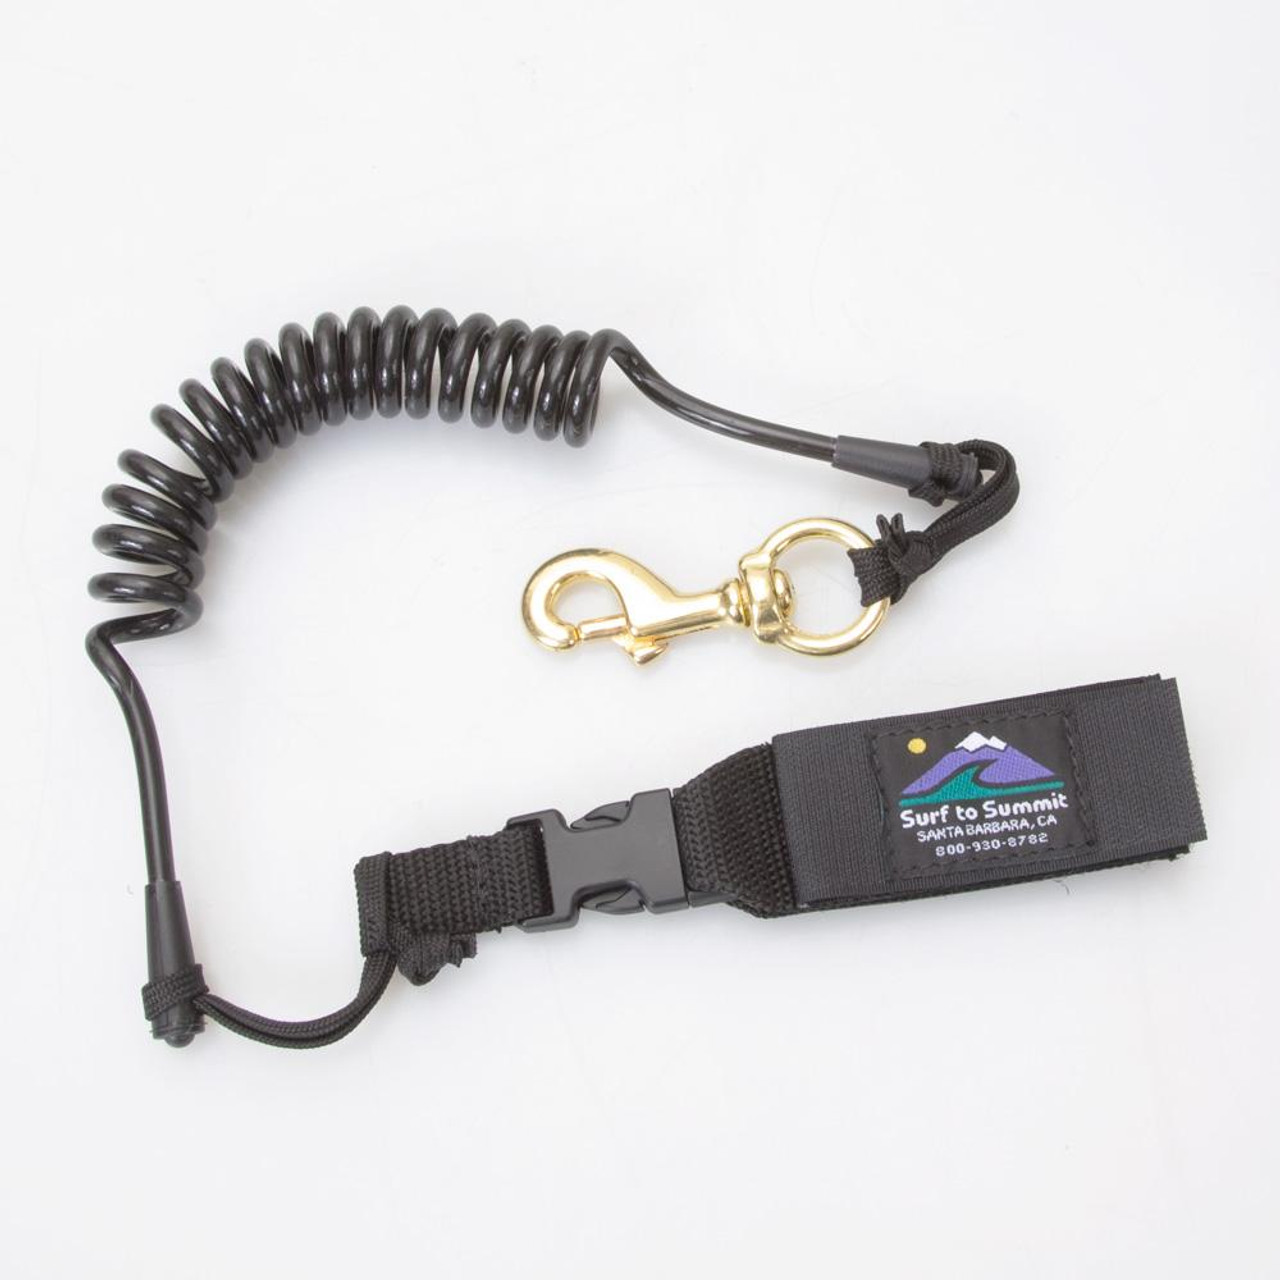 WolfPack Tackle Safety Line Rod/Reel Fishing Leashes